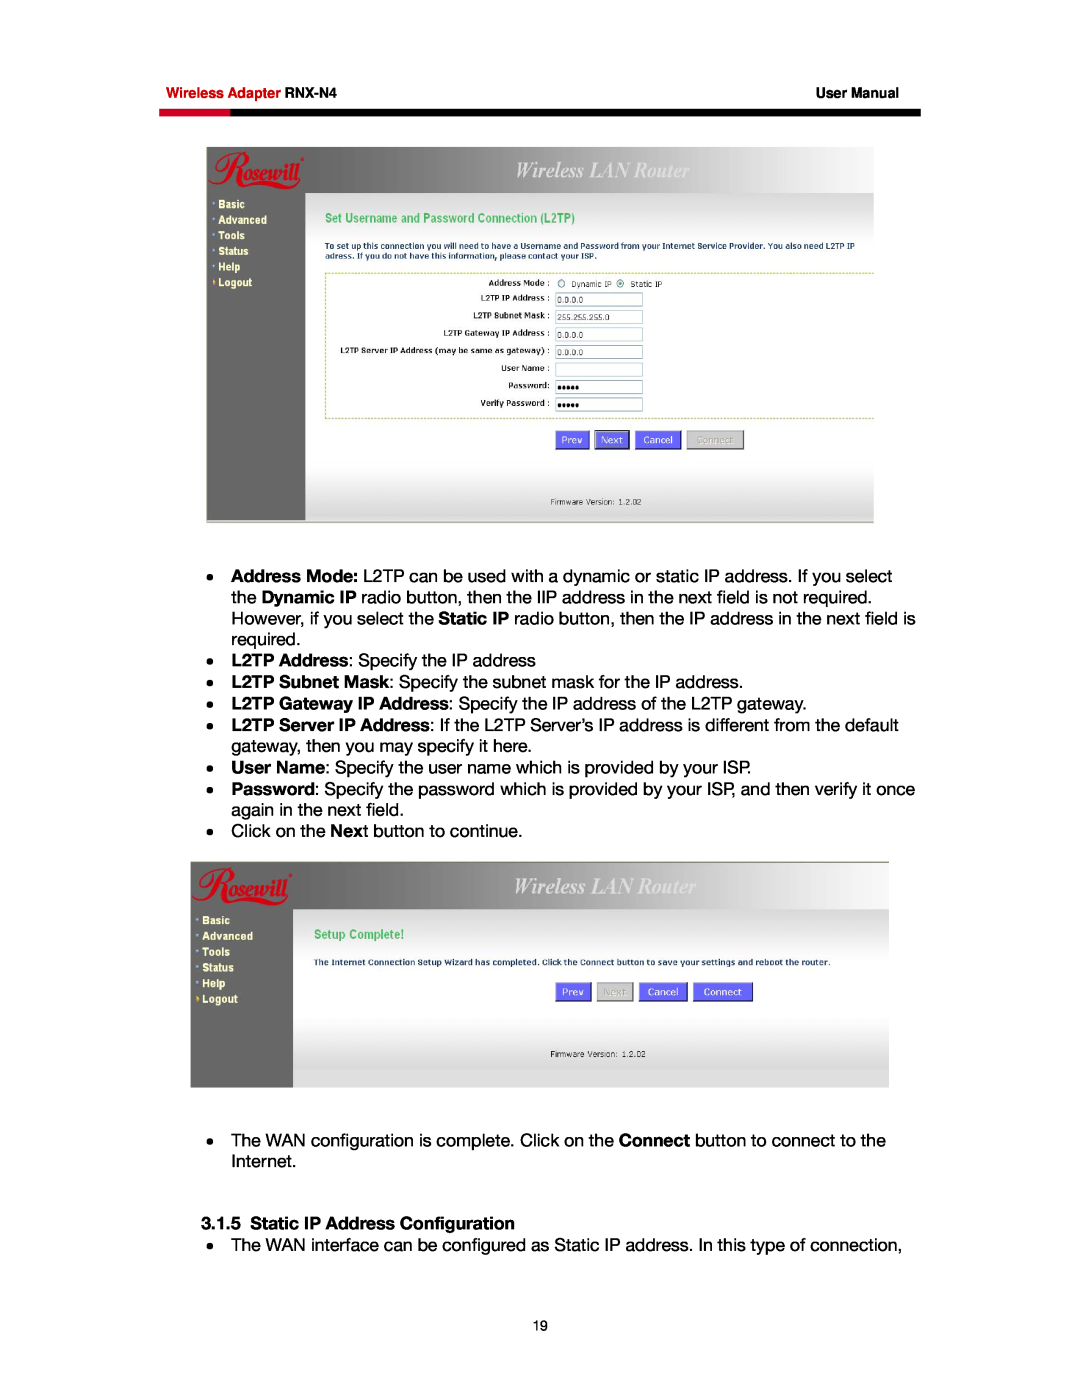 Rosewill RNX-N4 user manual Static IP Address Configuration 